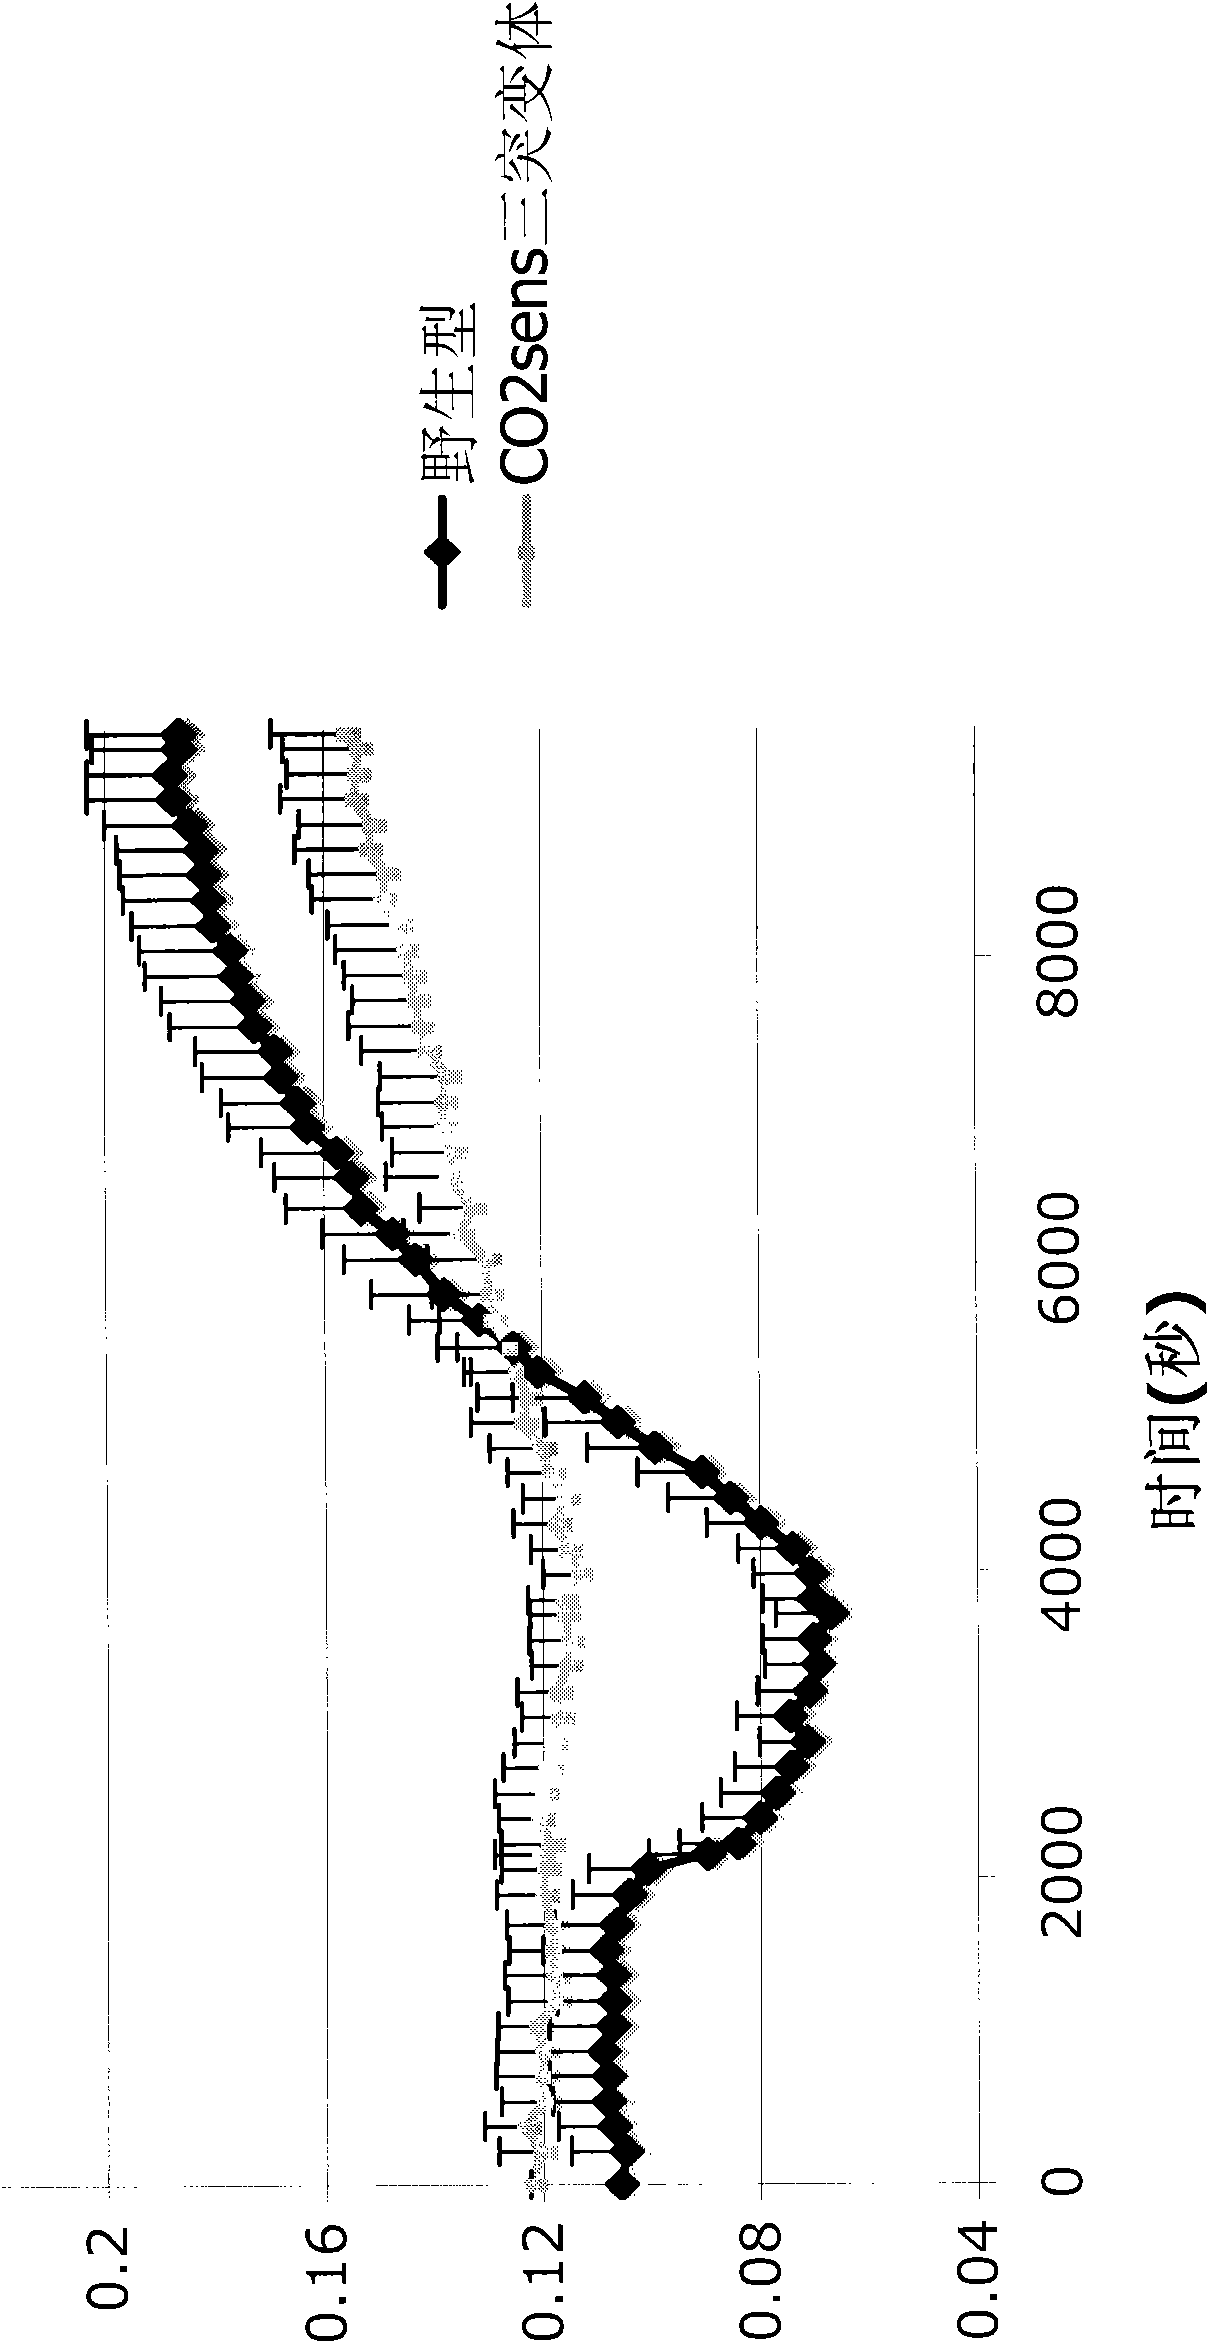 Plant CO2 sensors, nucleic acids encoding them, and methods for making and using them